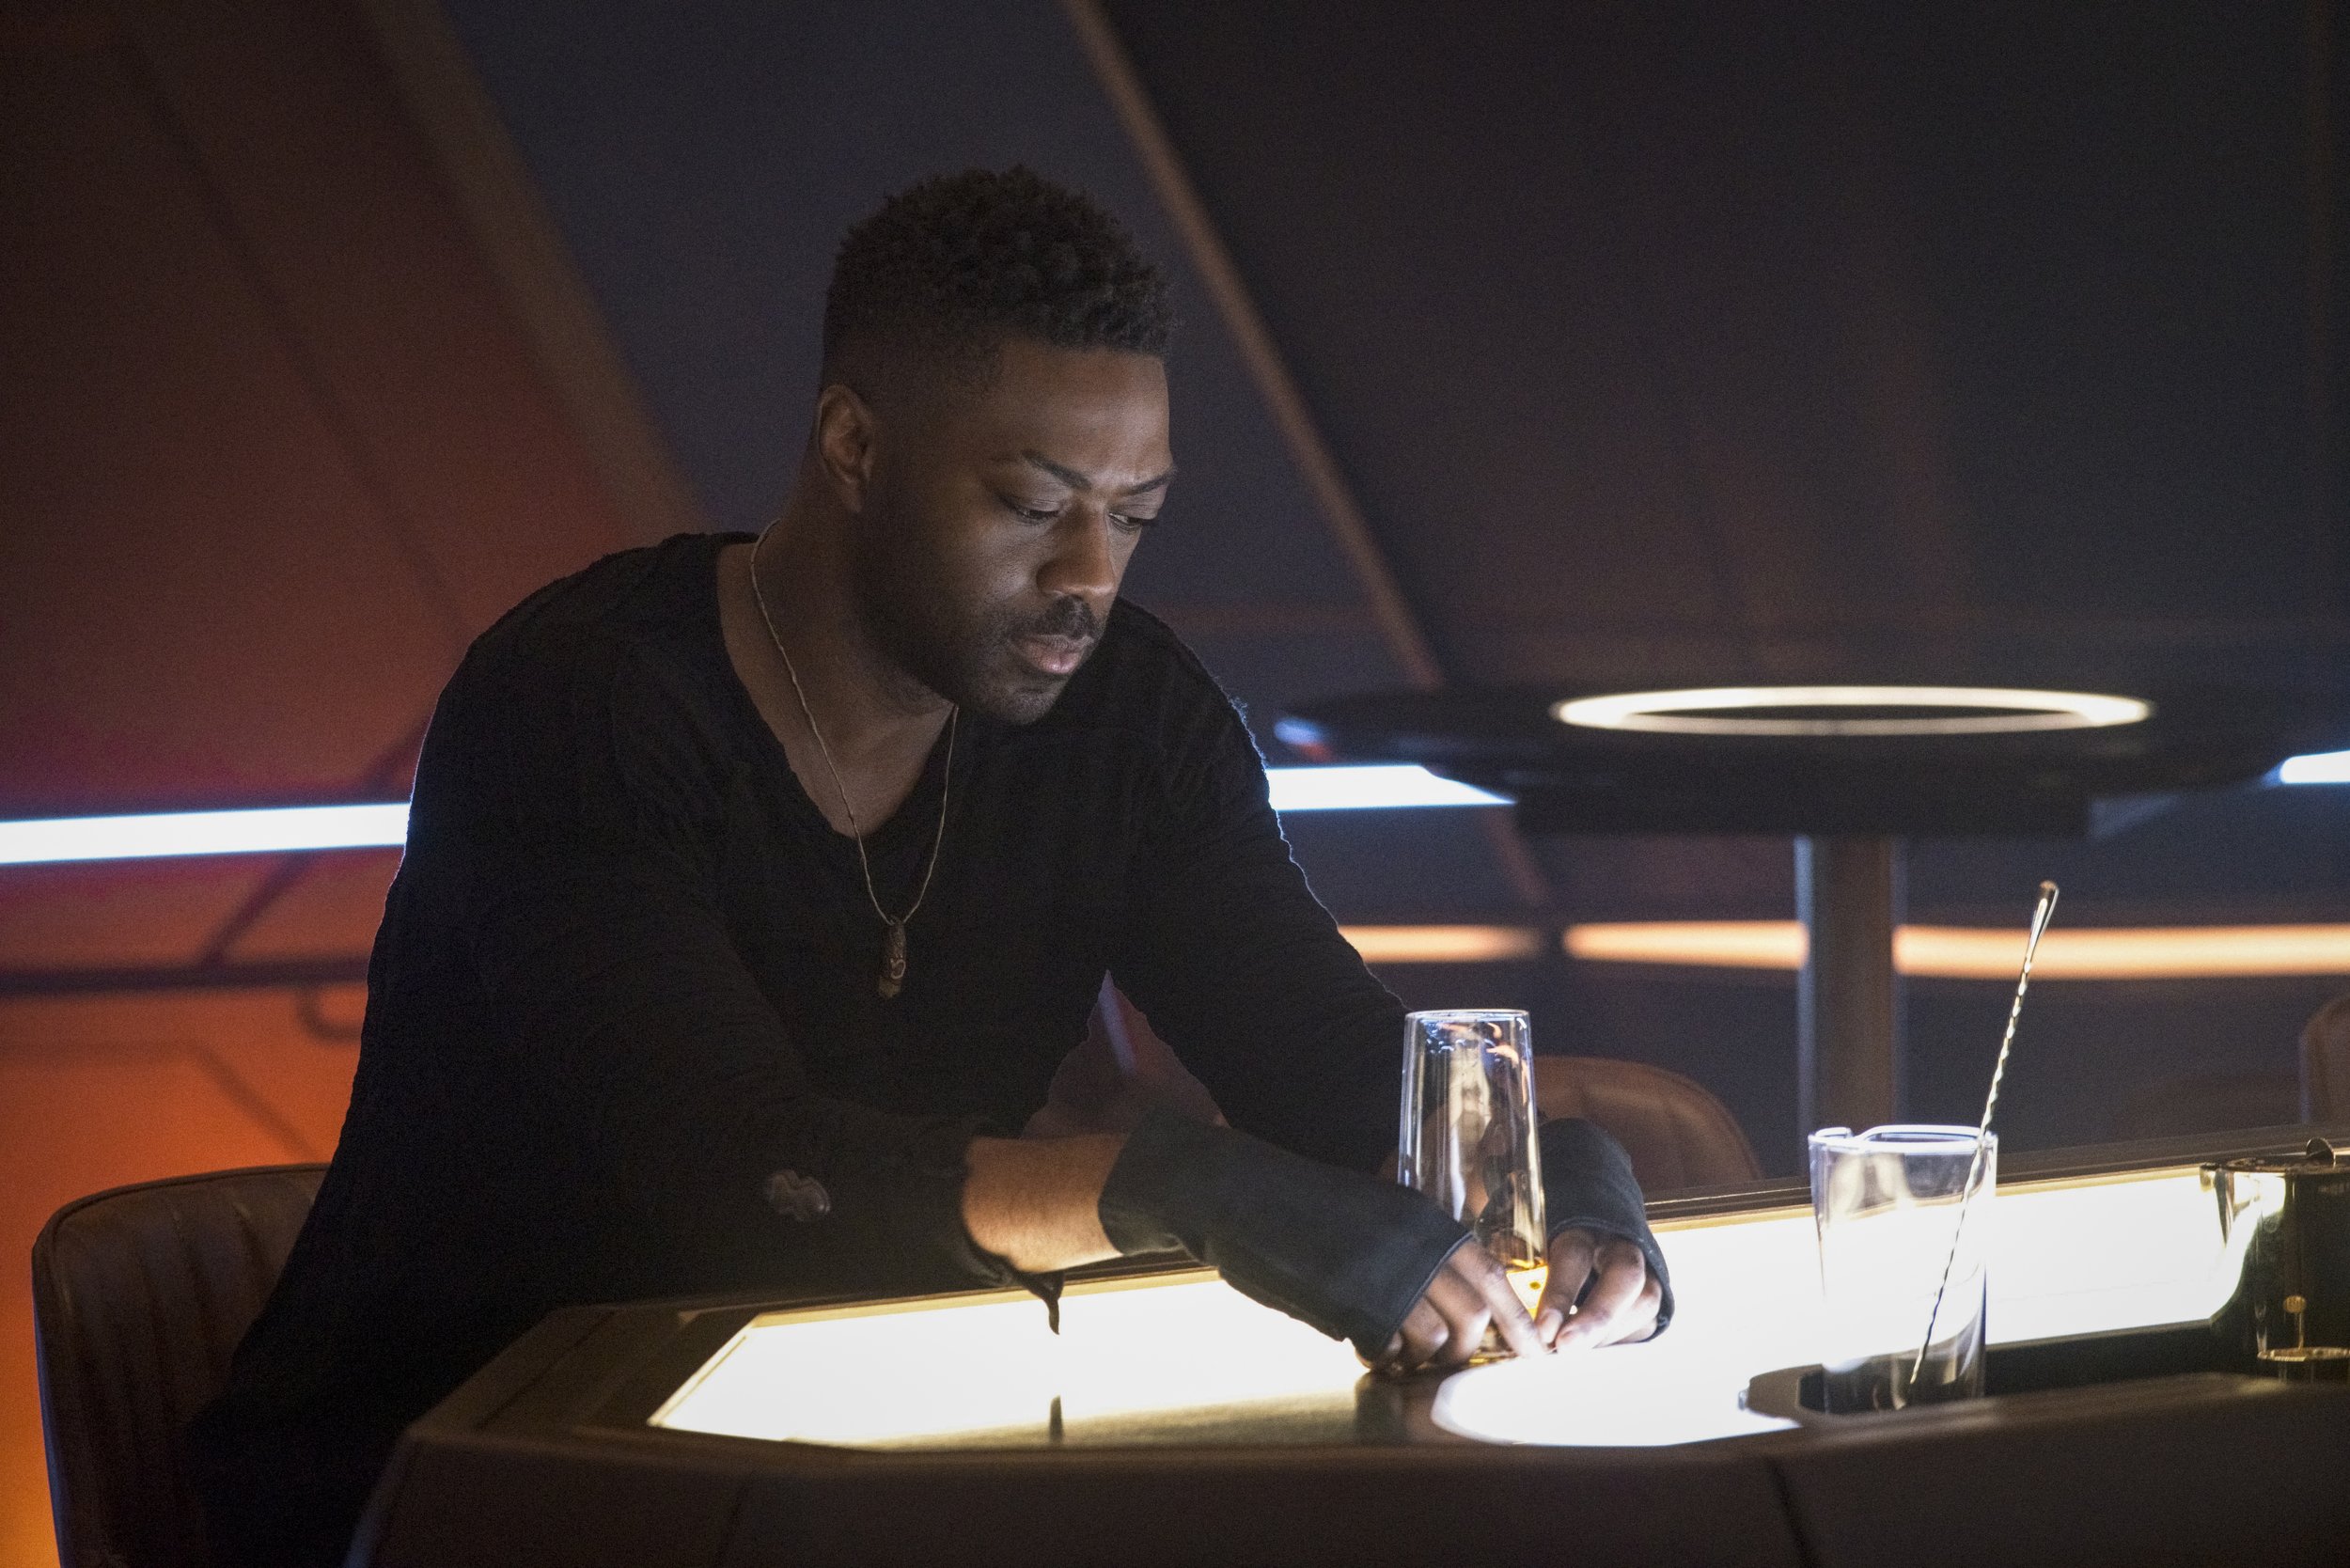   Pictured: David Ajala as Book of the Paramount+ original series STAR TREK: DISCOVERY. Photo Cr: Michael Gibson/Paramount+ (C) 2021 CBS Interactive. All Rights Reserved.  